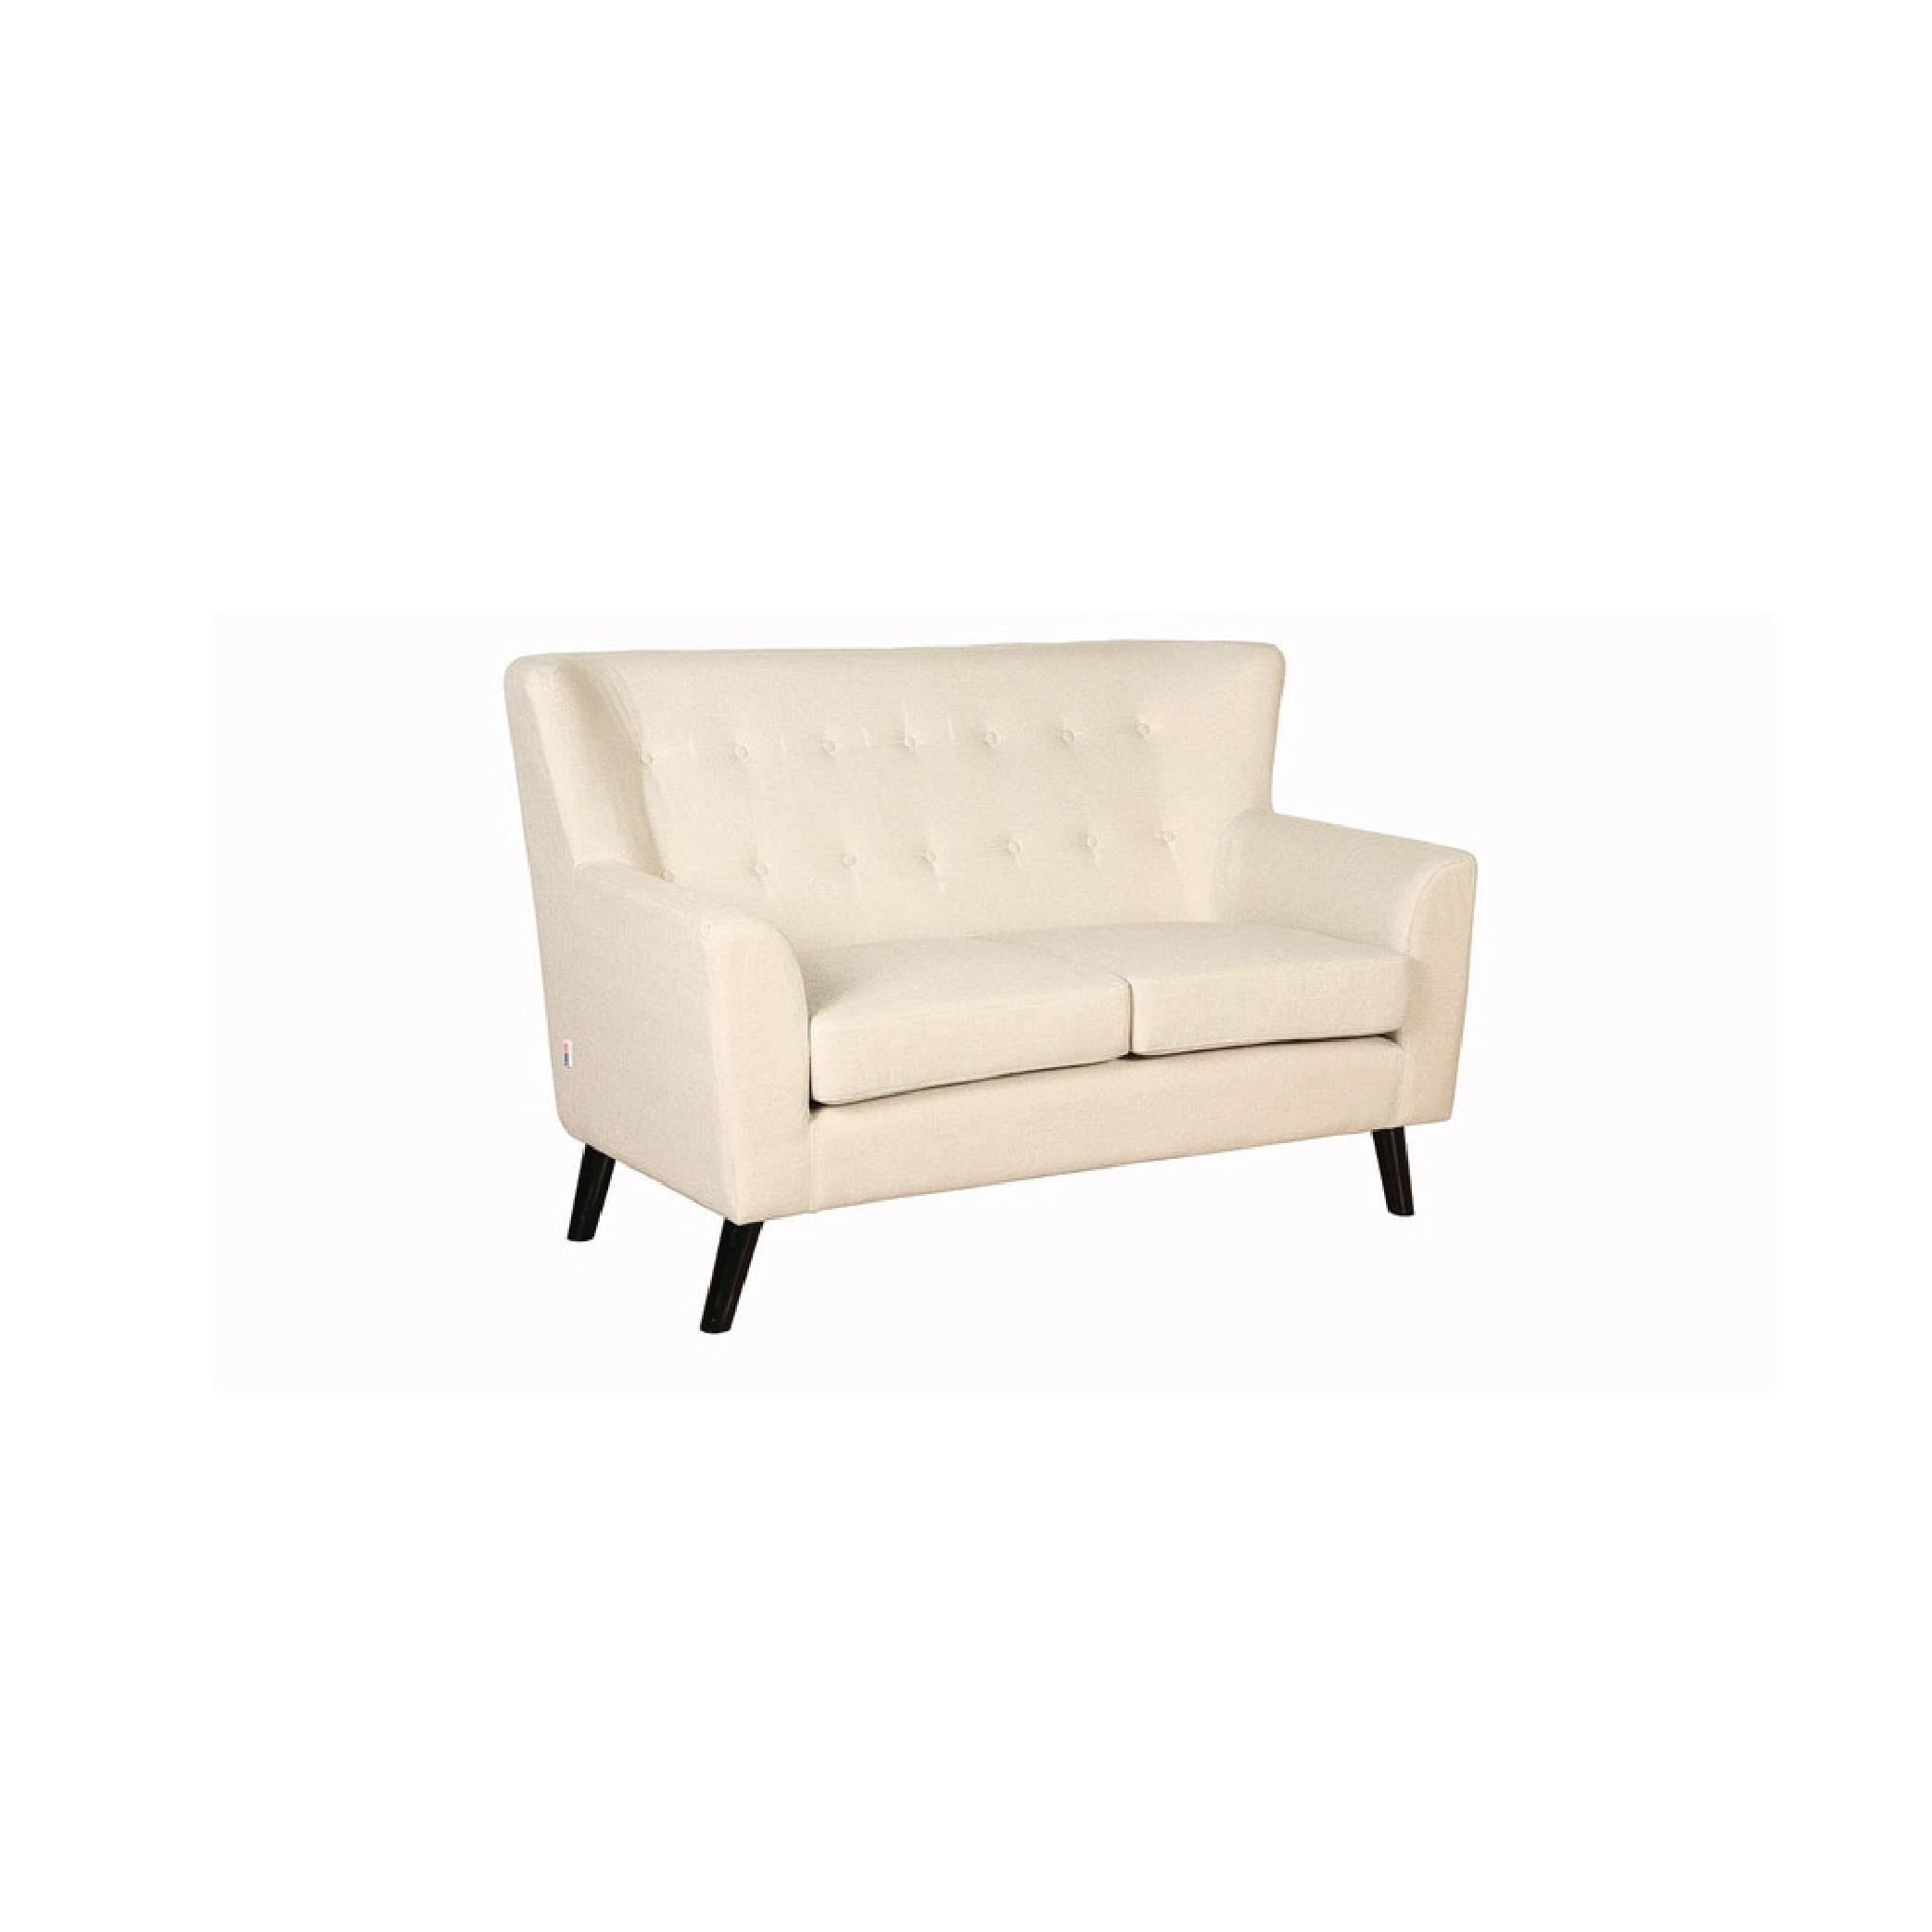 Torre Two Seater Sofa in Beige Colour